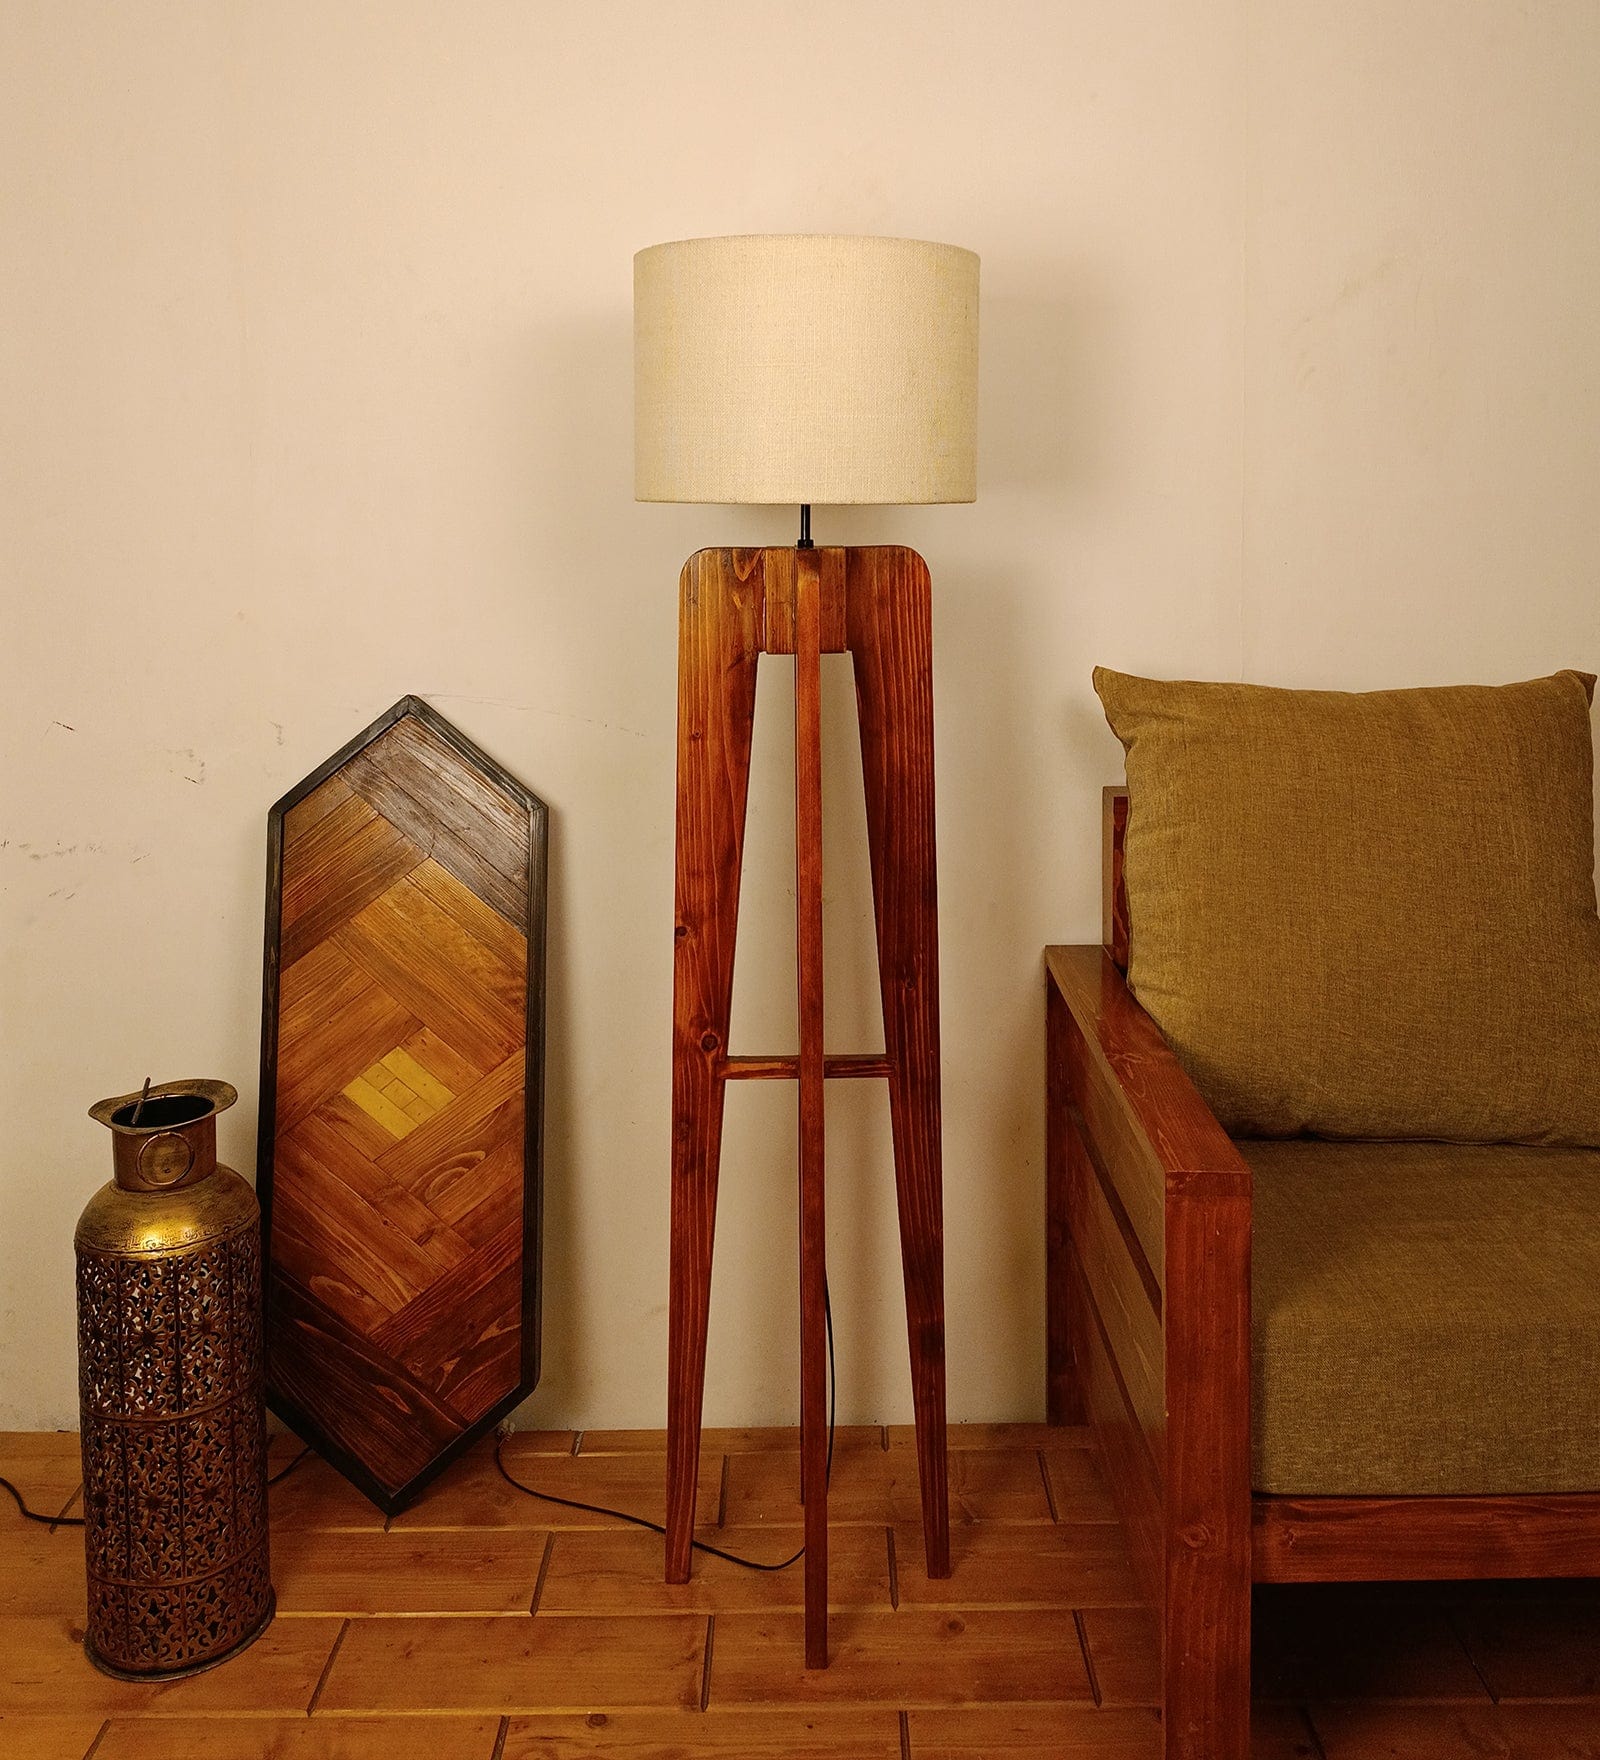 Jet Wooden Floor Lamp with Premium Beige Fabric Lampshade (BULB NOT INCLUDED)